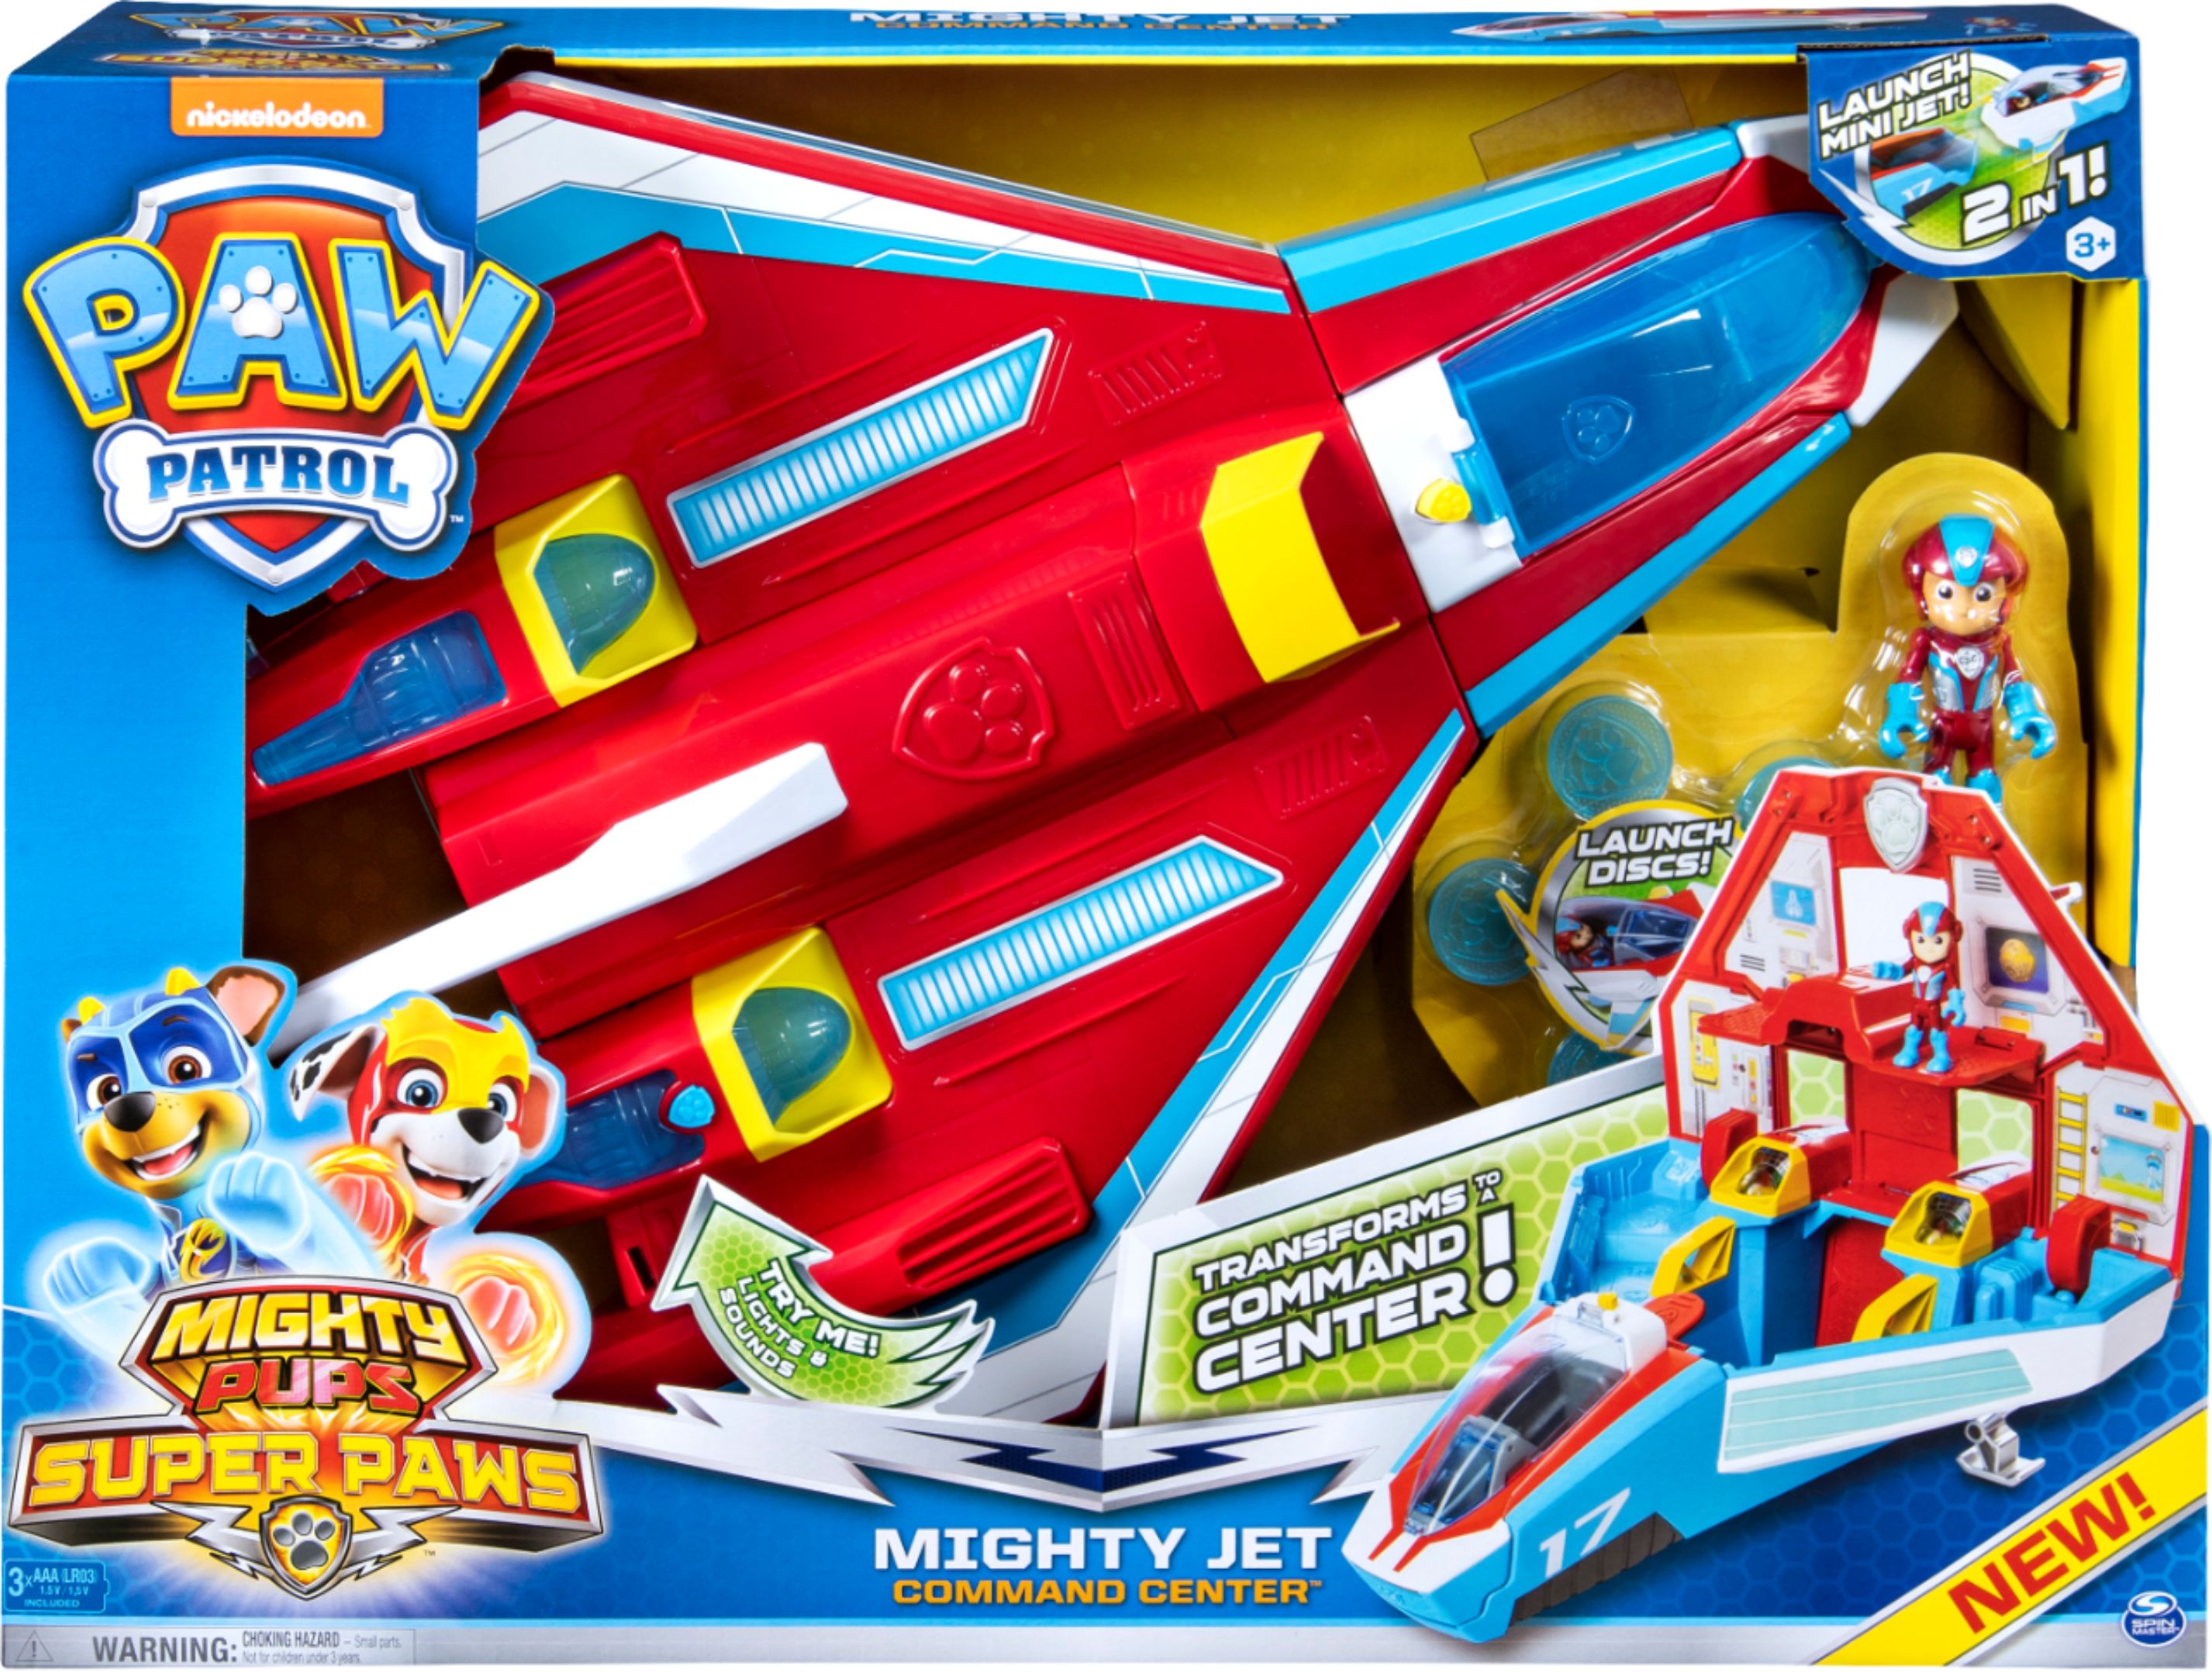 Paw Patrol Mighty Pups Super Paws 